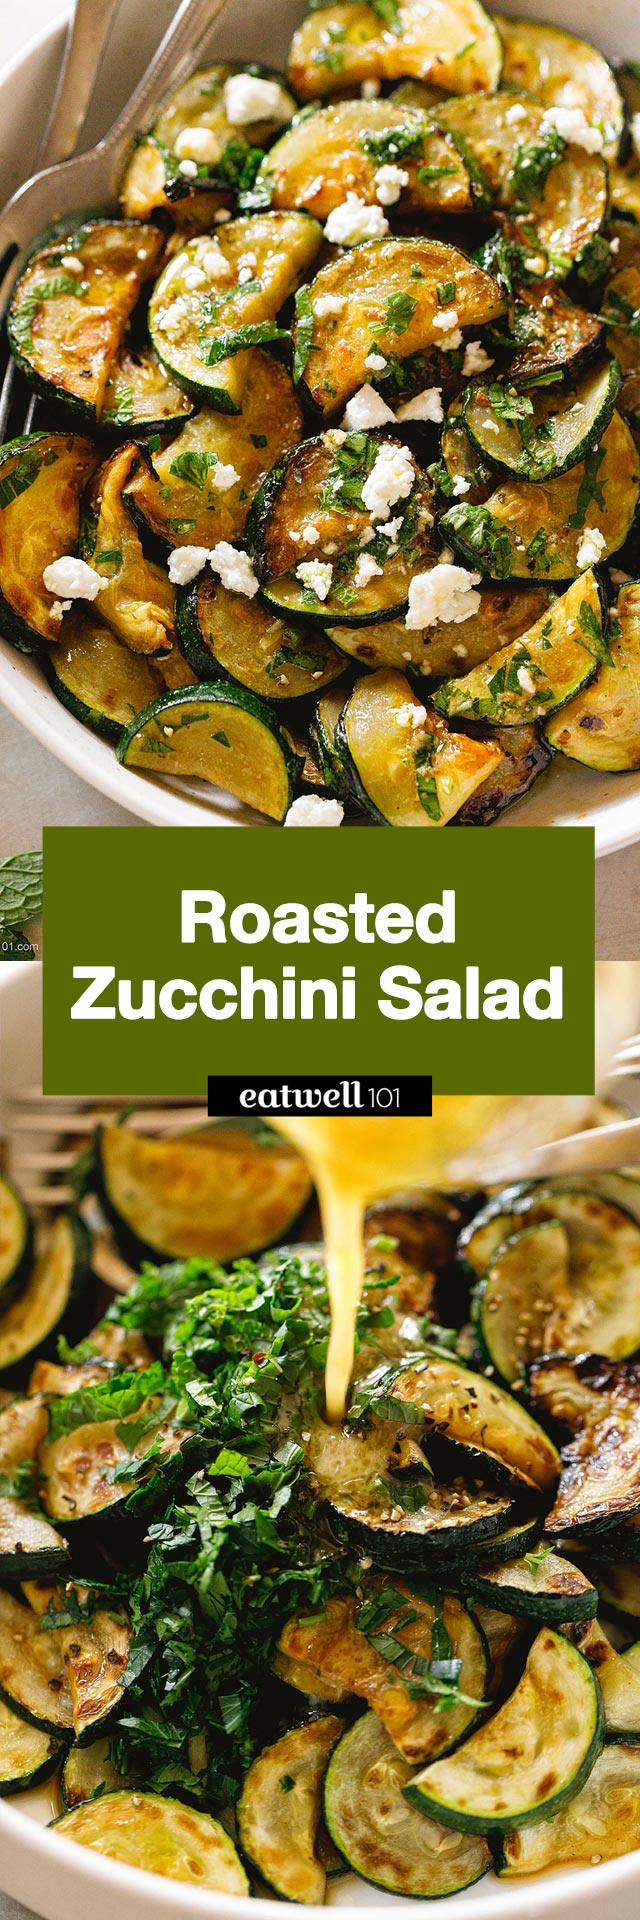 Roasted Zucchini Salad - #zucchini #salad #recipe #eatwell101 - This roasted zucchini salad is super flavorful and healthy, you’ll want to make this roasted zucchini salad with feta all summer long!